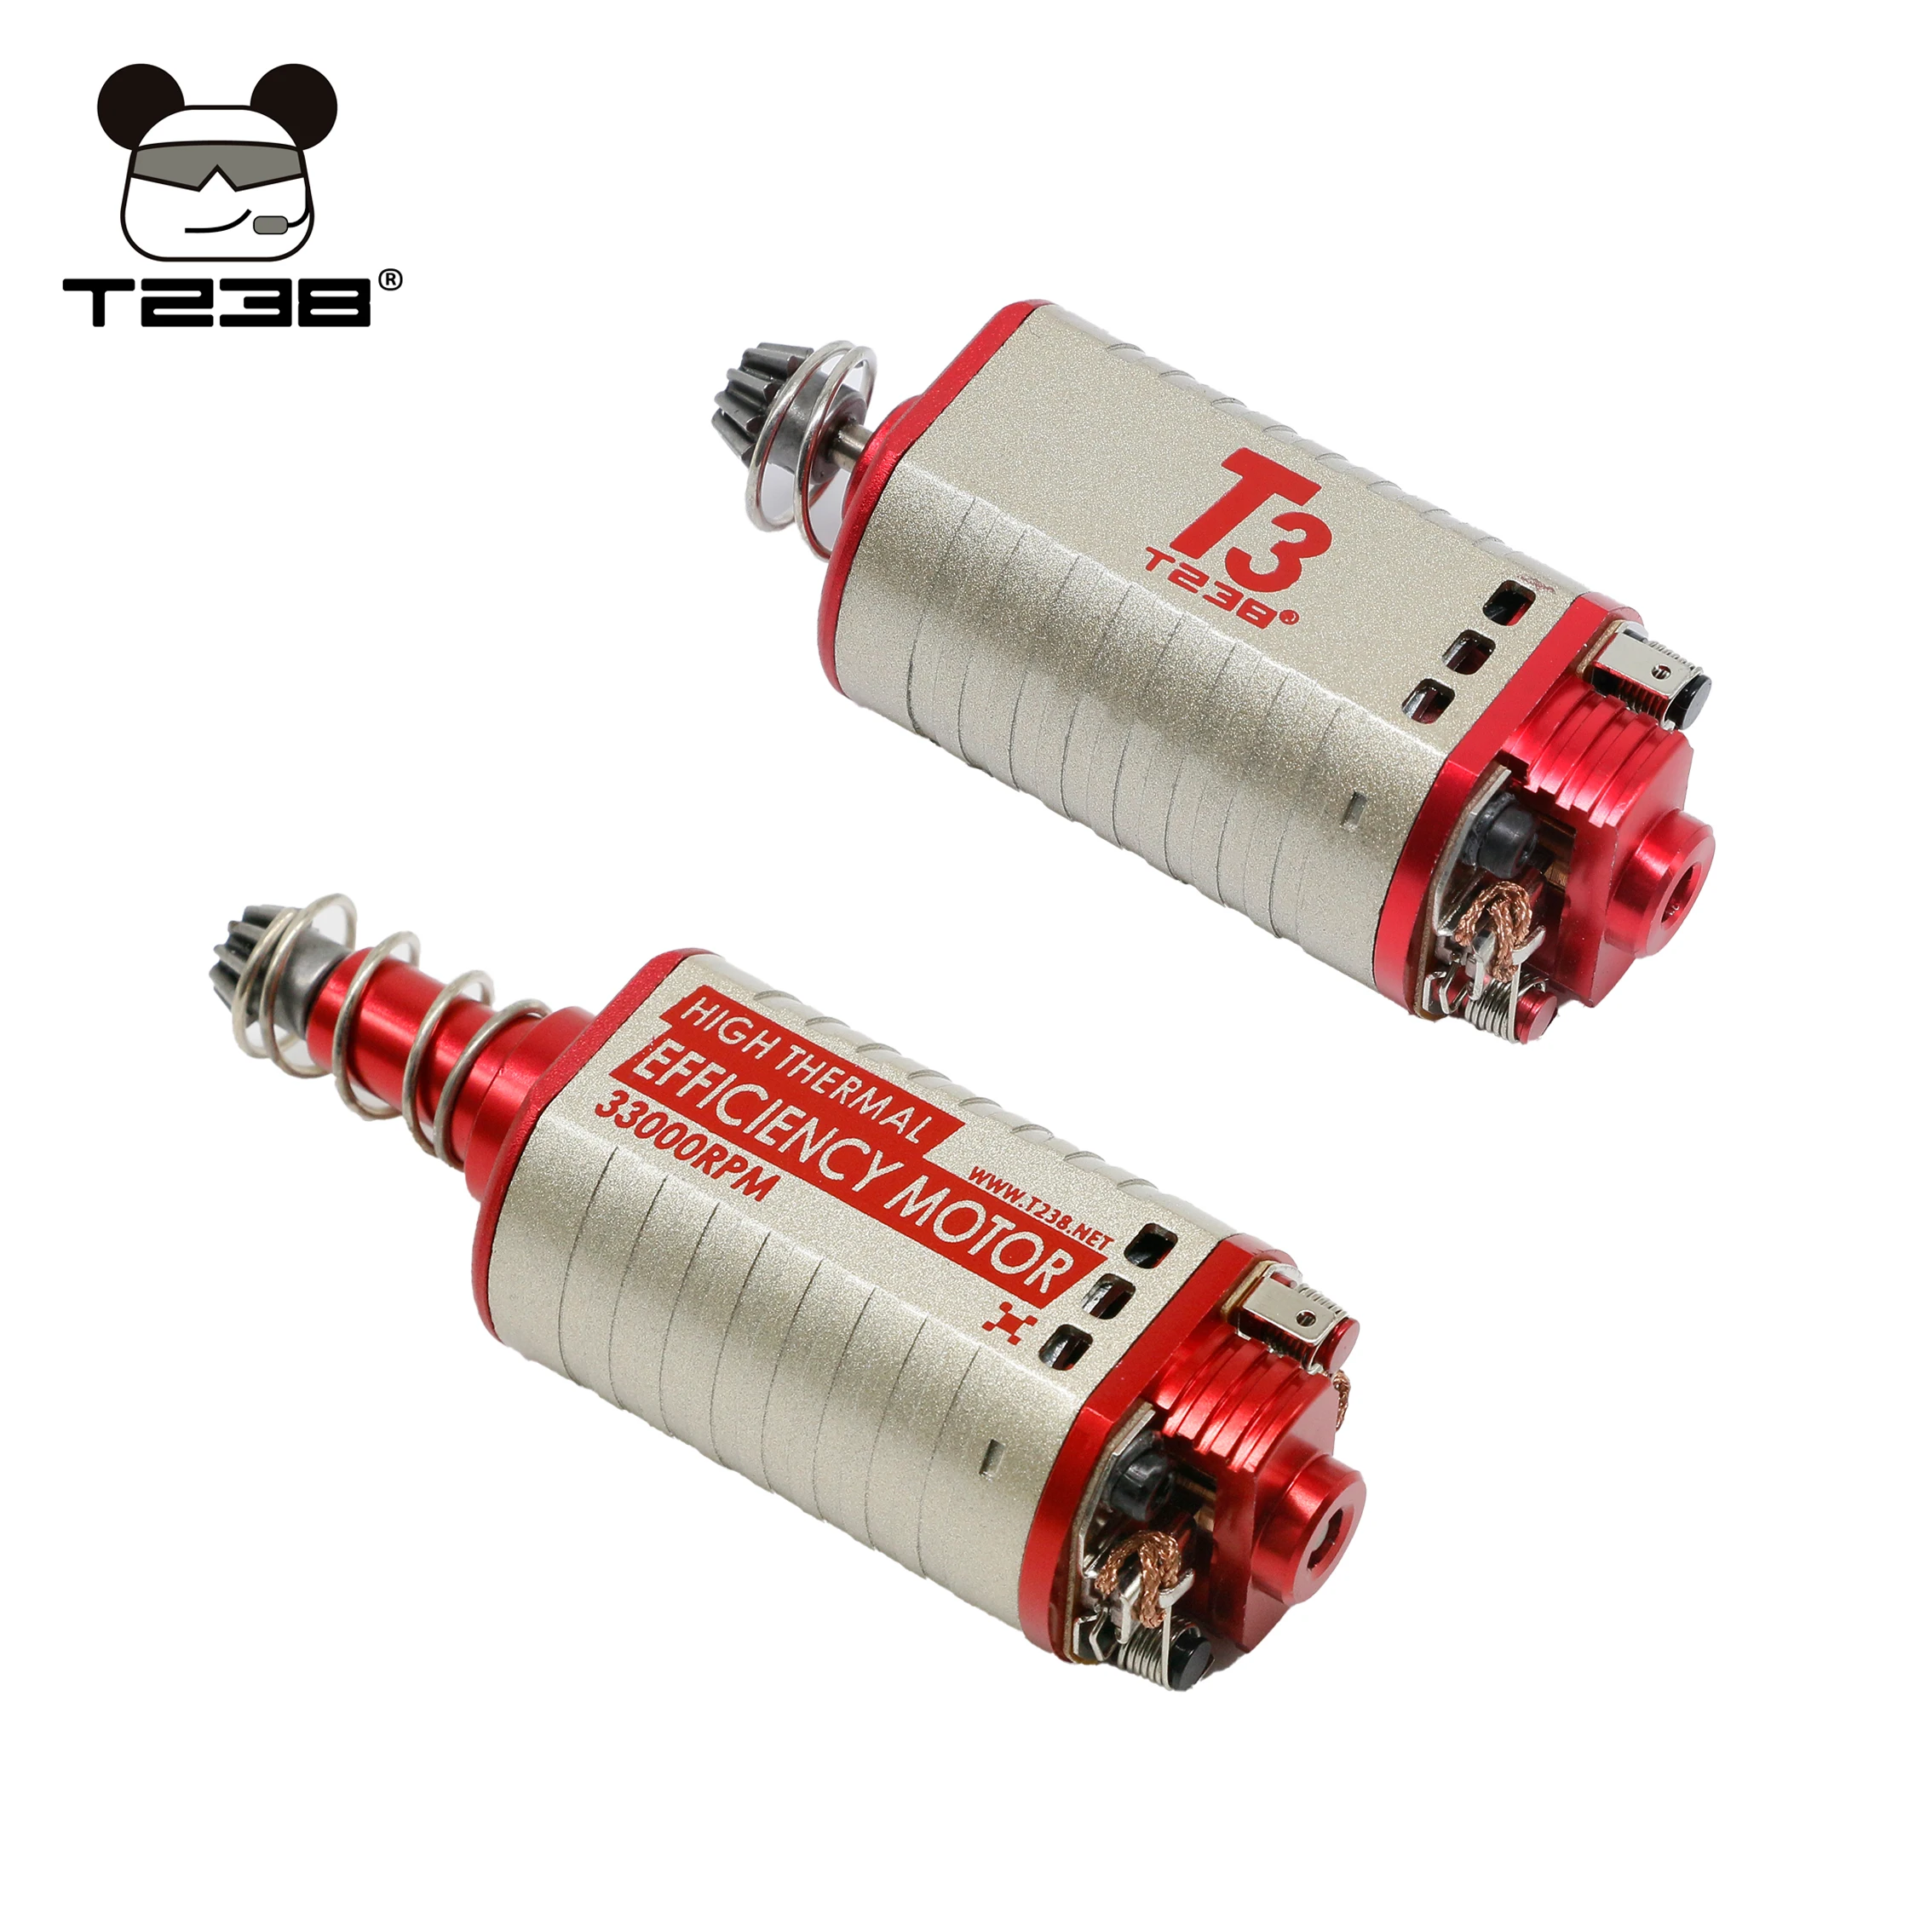 T238 High-speed High-torque Motor N35 20/18TPA High Thermal Efficiency Motor Long/Short Axel 480 Motor for Airsoft V2 V3 Gearbox